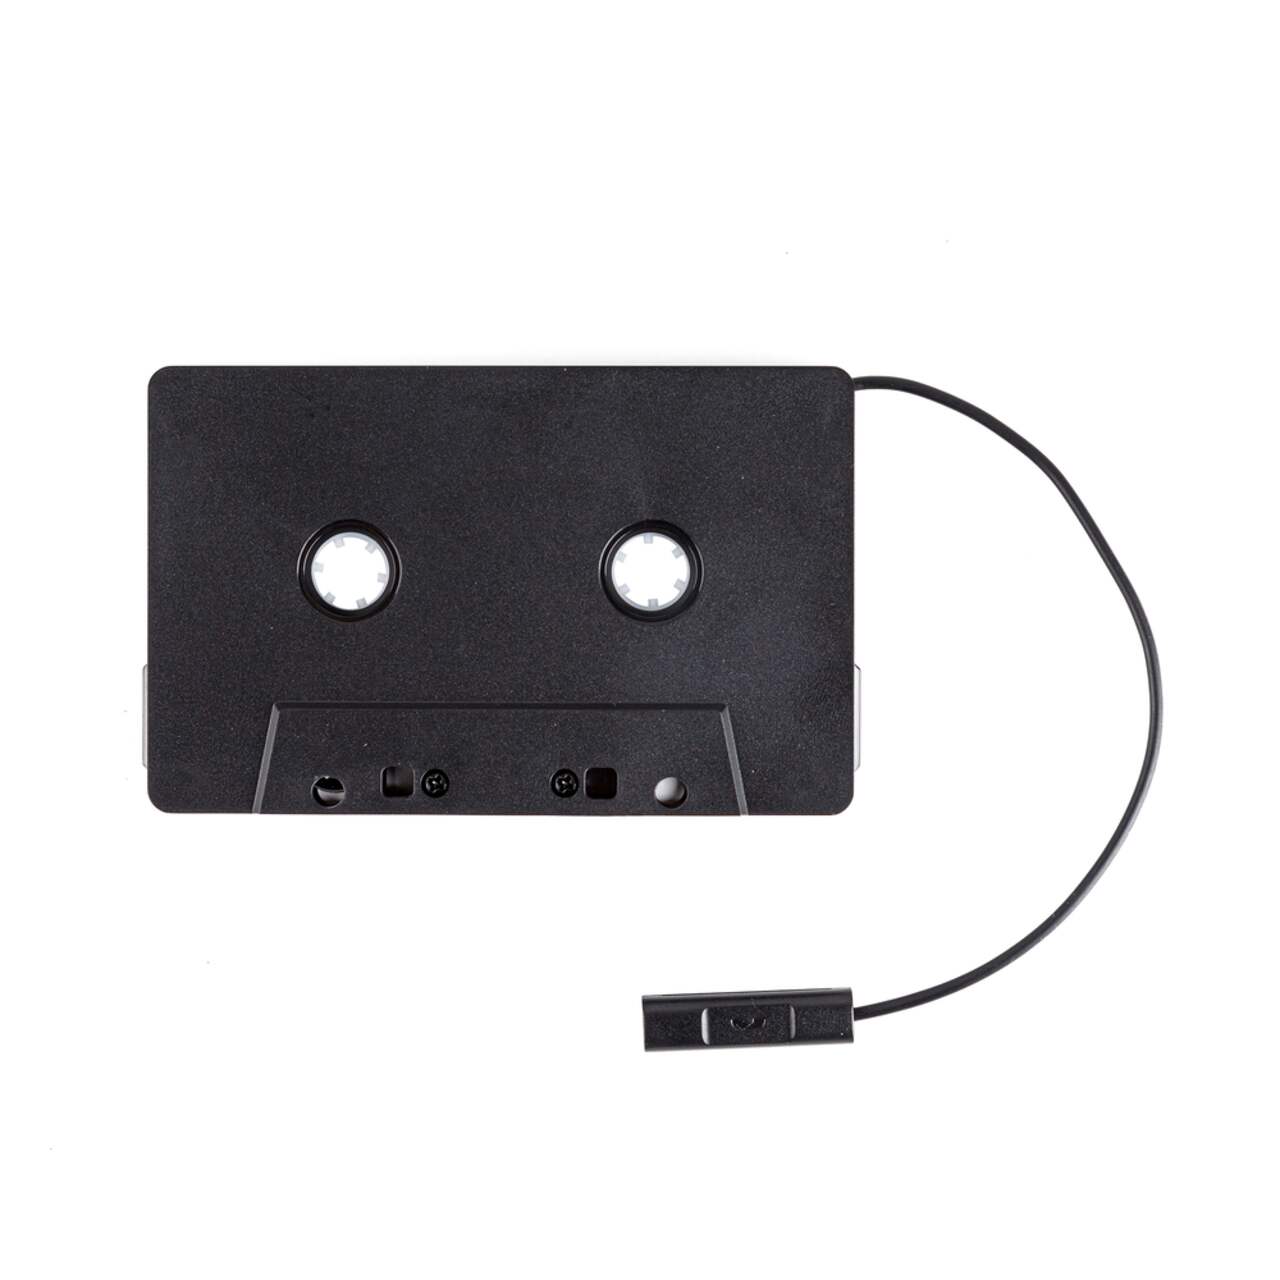 Bluehive Bluetooth Audio Cassette Adapter with Built-in Microphone, Black